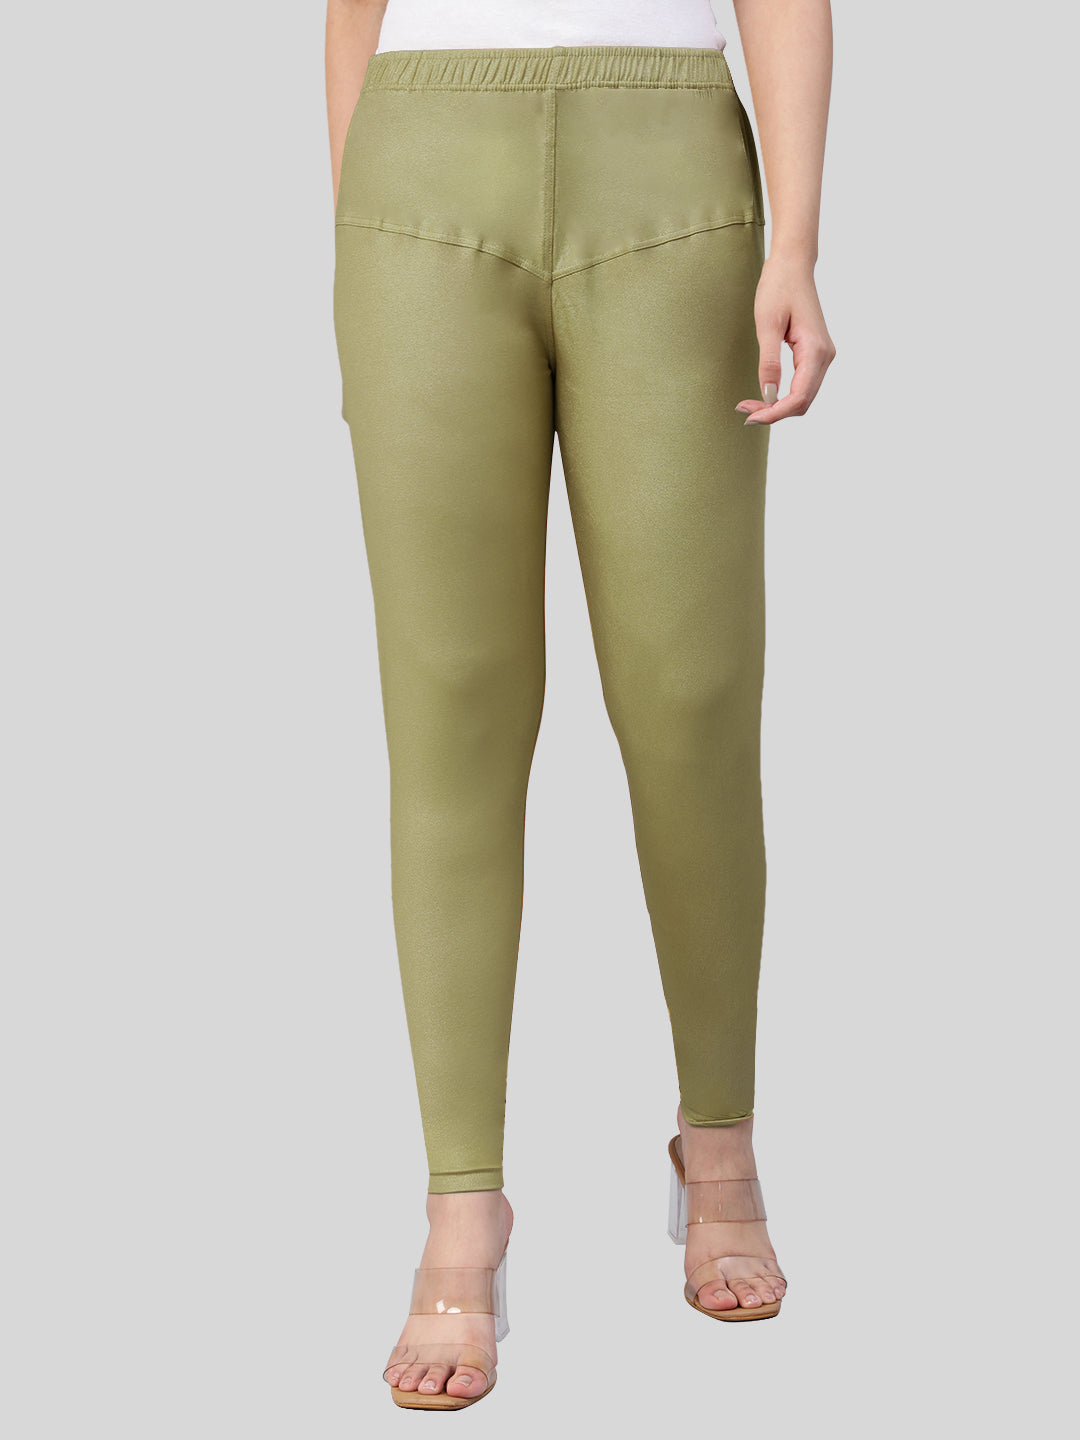 Best Reviewed Leggings On Amazon Prime | International Society of Precision  Agriculture